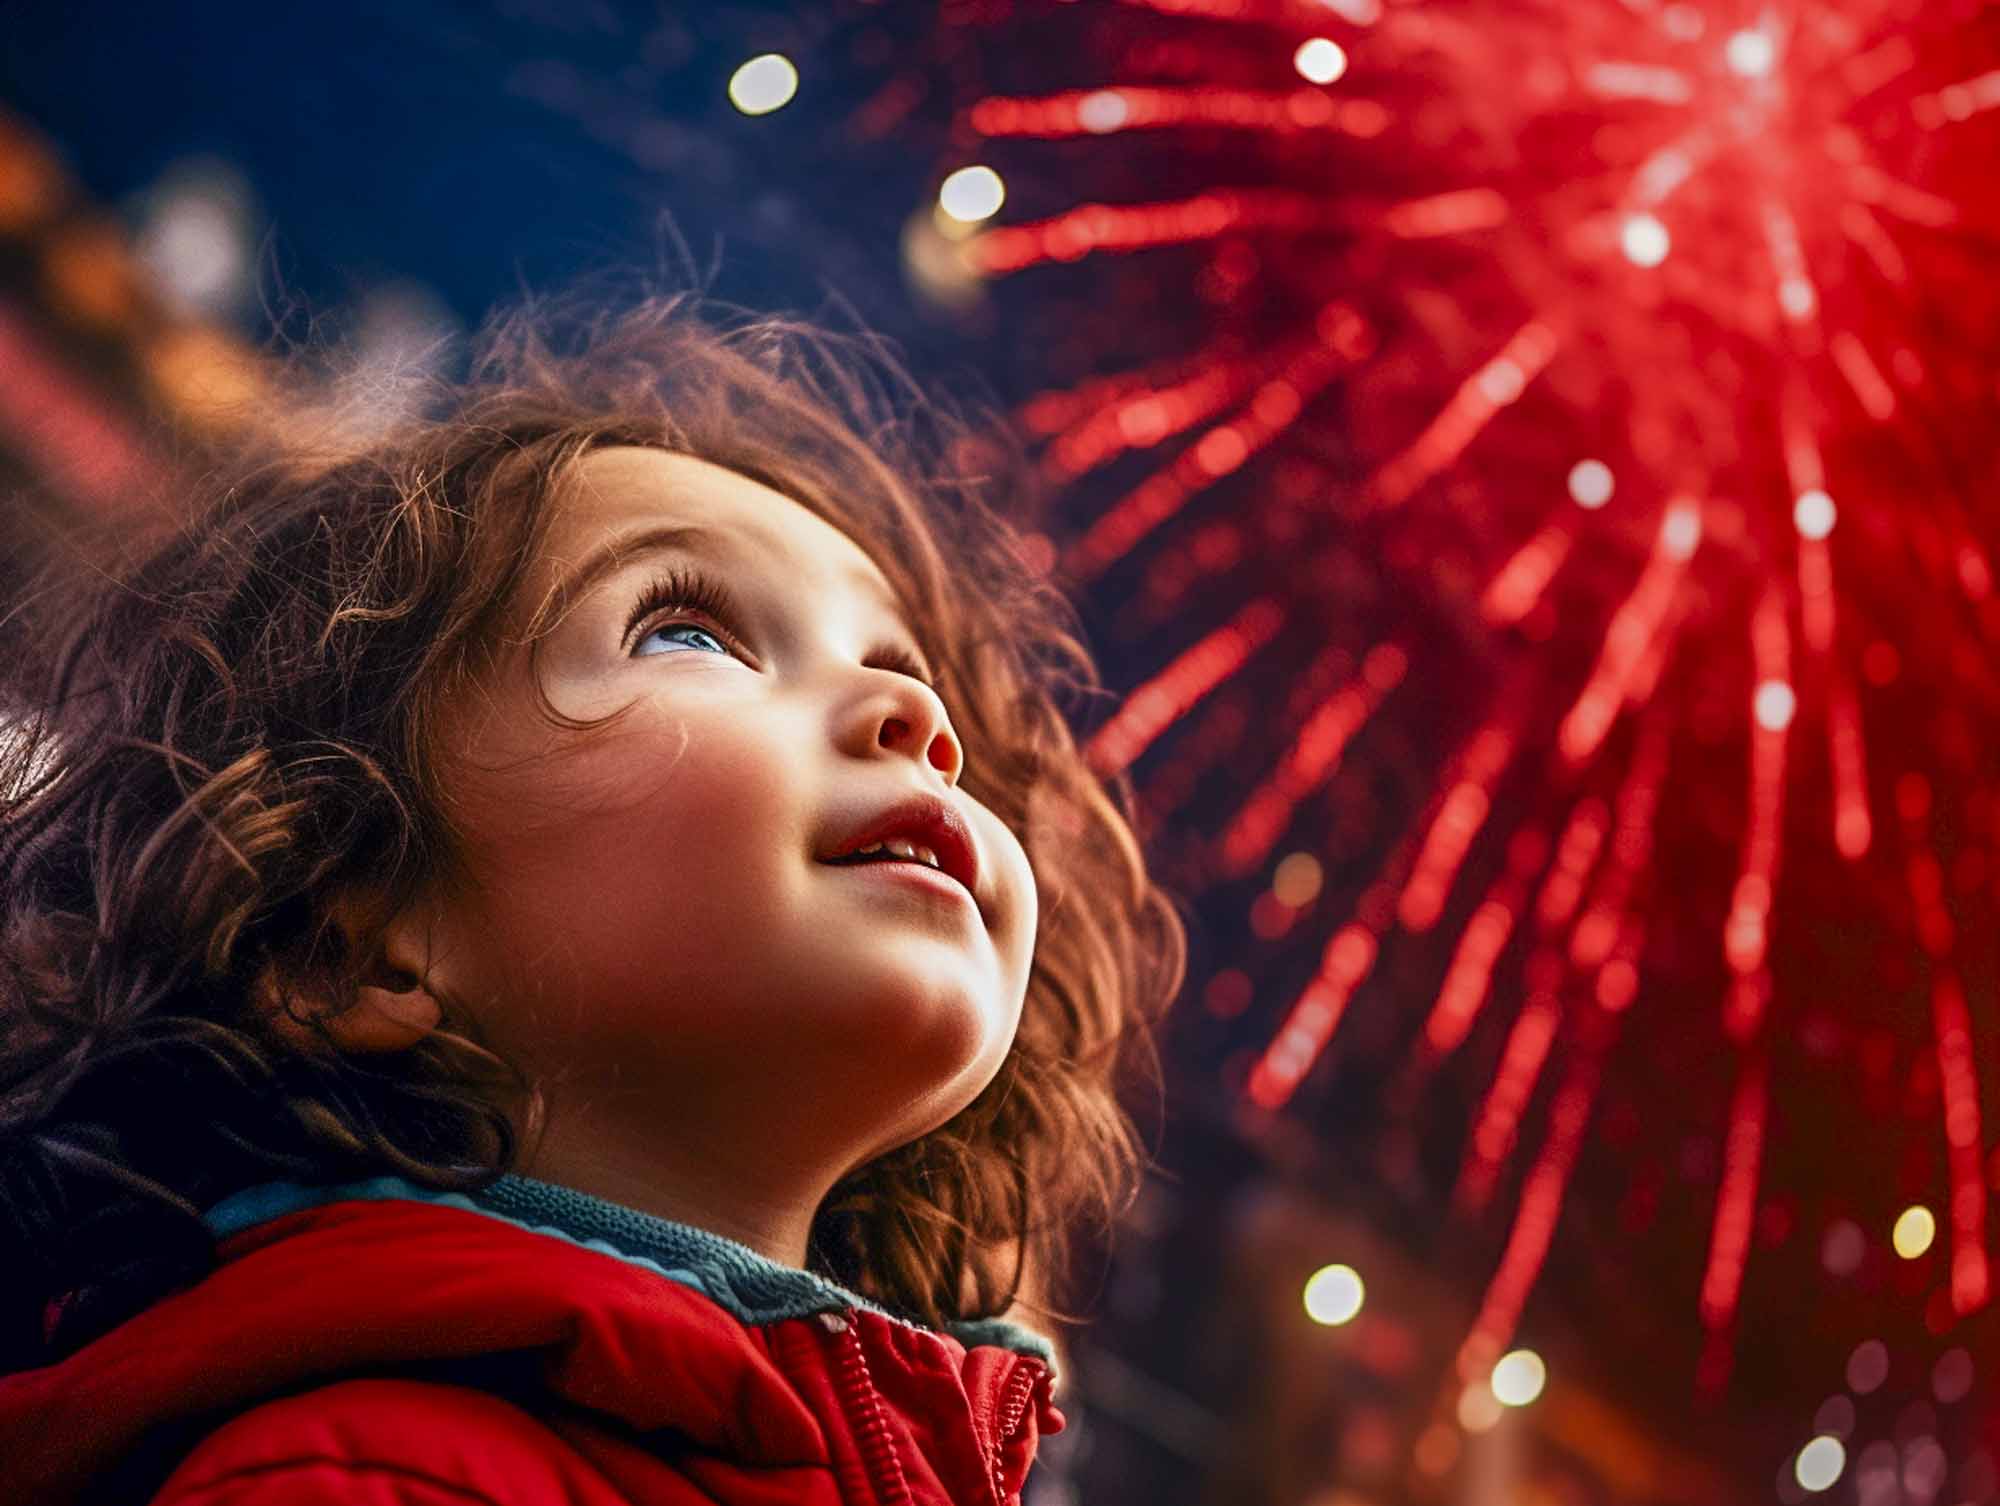 zavesmith_a_child_looking_up_at_fireworks_in_the_sky_with_a_sen_49c19d7c-07f1-4eb7-a919-9e087c8292ee